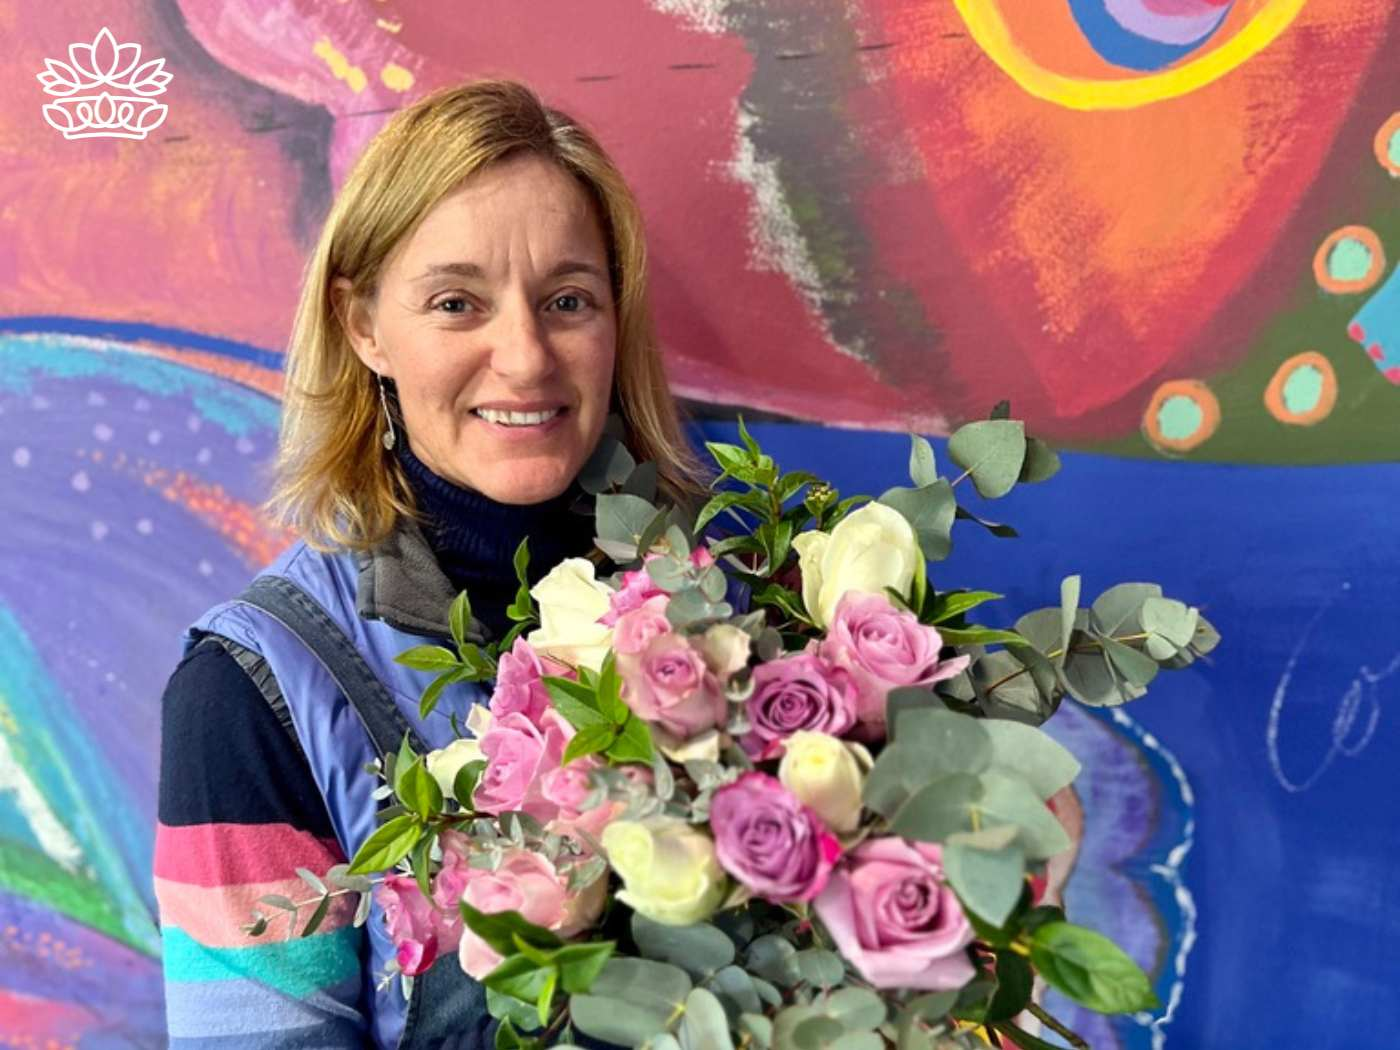 A florist with a warm smile, holding a delicate flower bouquet of pink and white roses interspersed with silvery eucalyptus, standing in front of a colorful mural, representing the Flowers By Occasion Collection at Fabulous Flowers and Gifts.